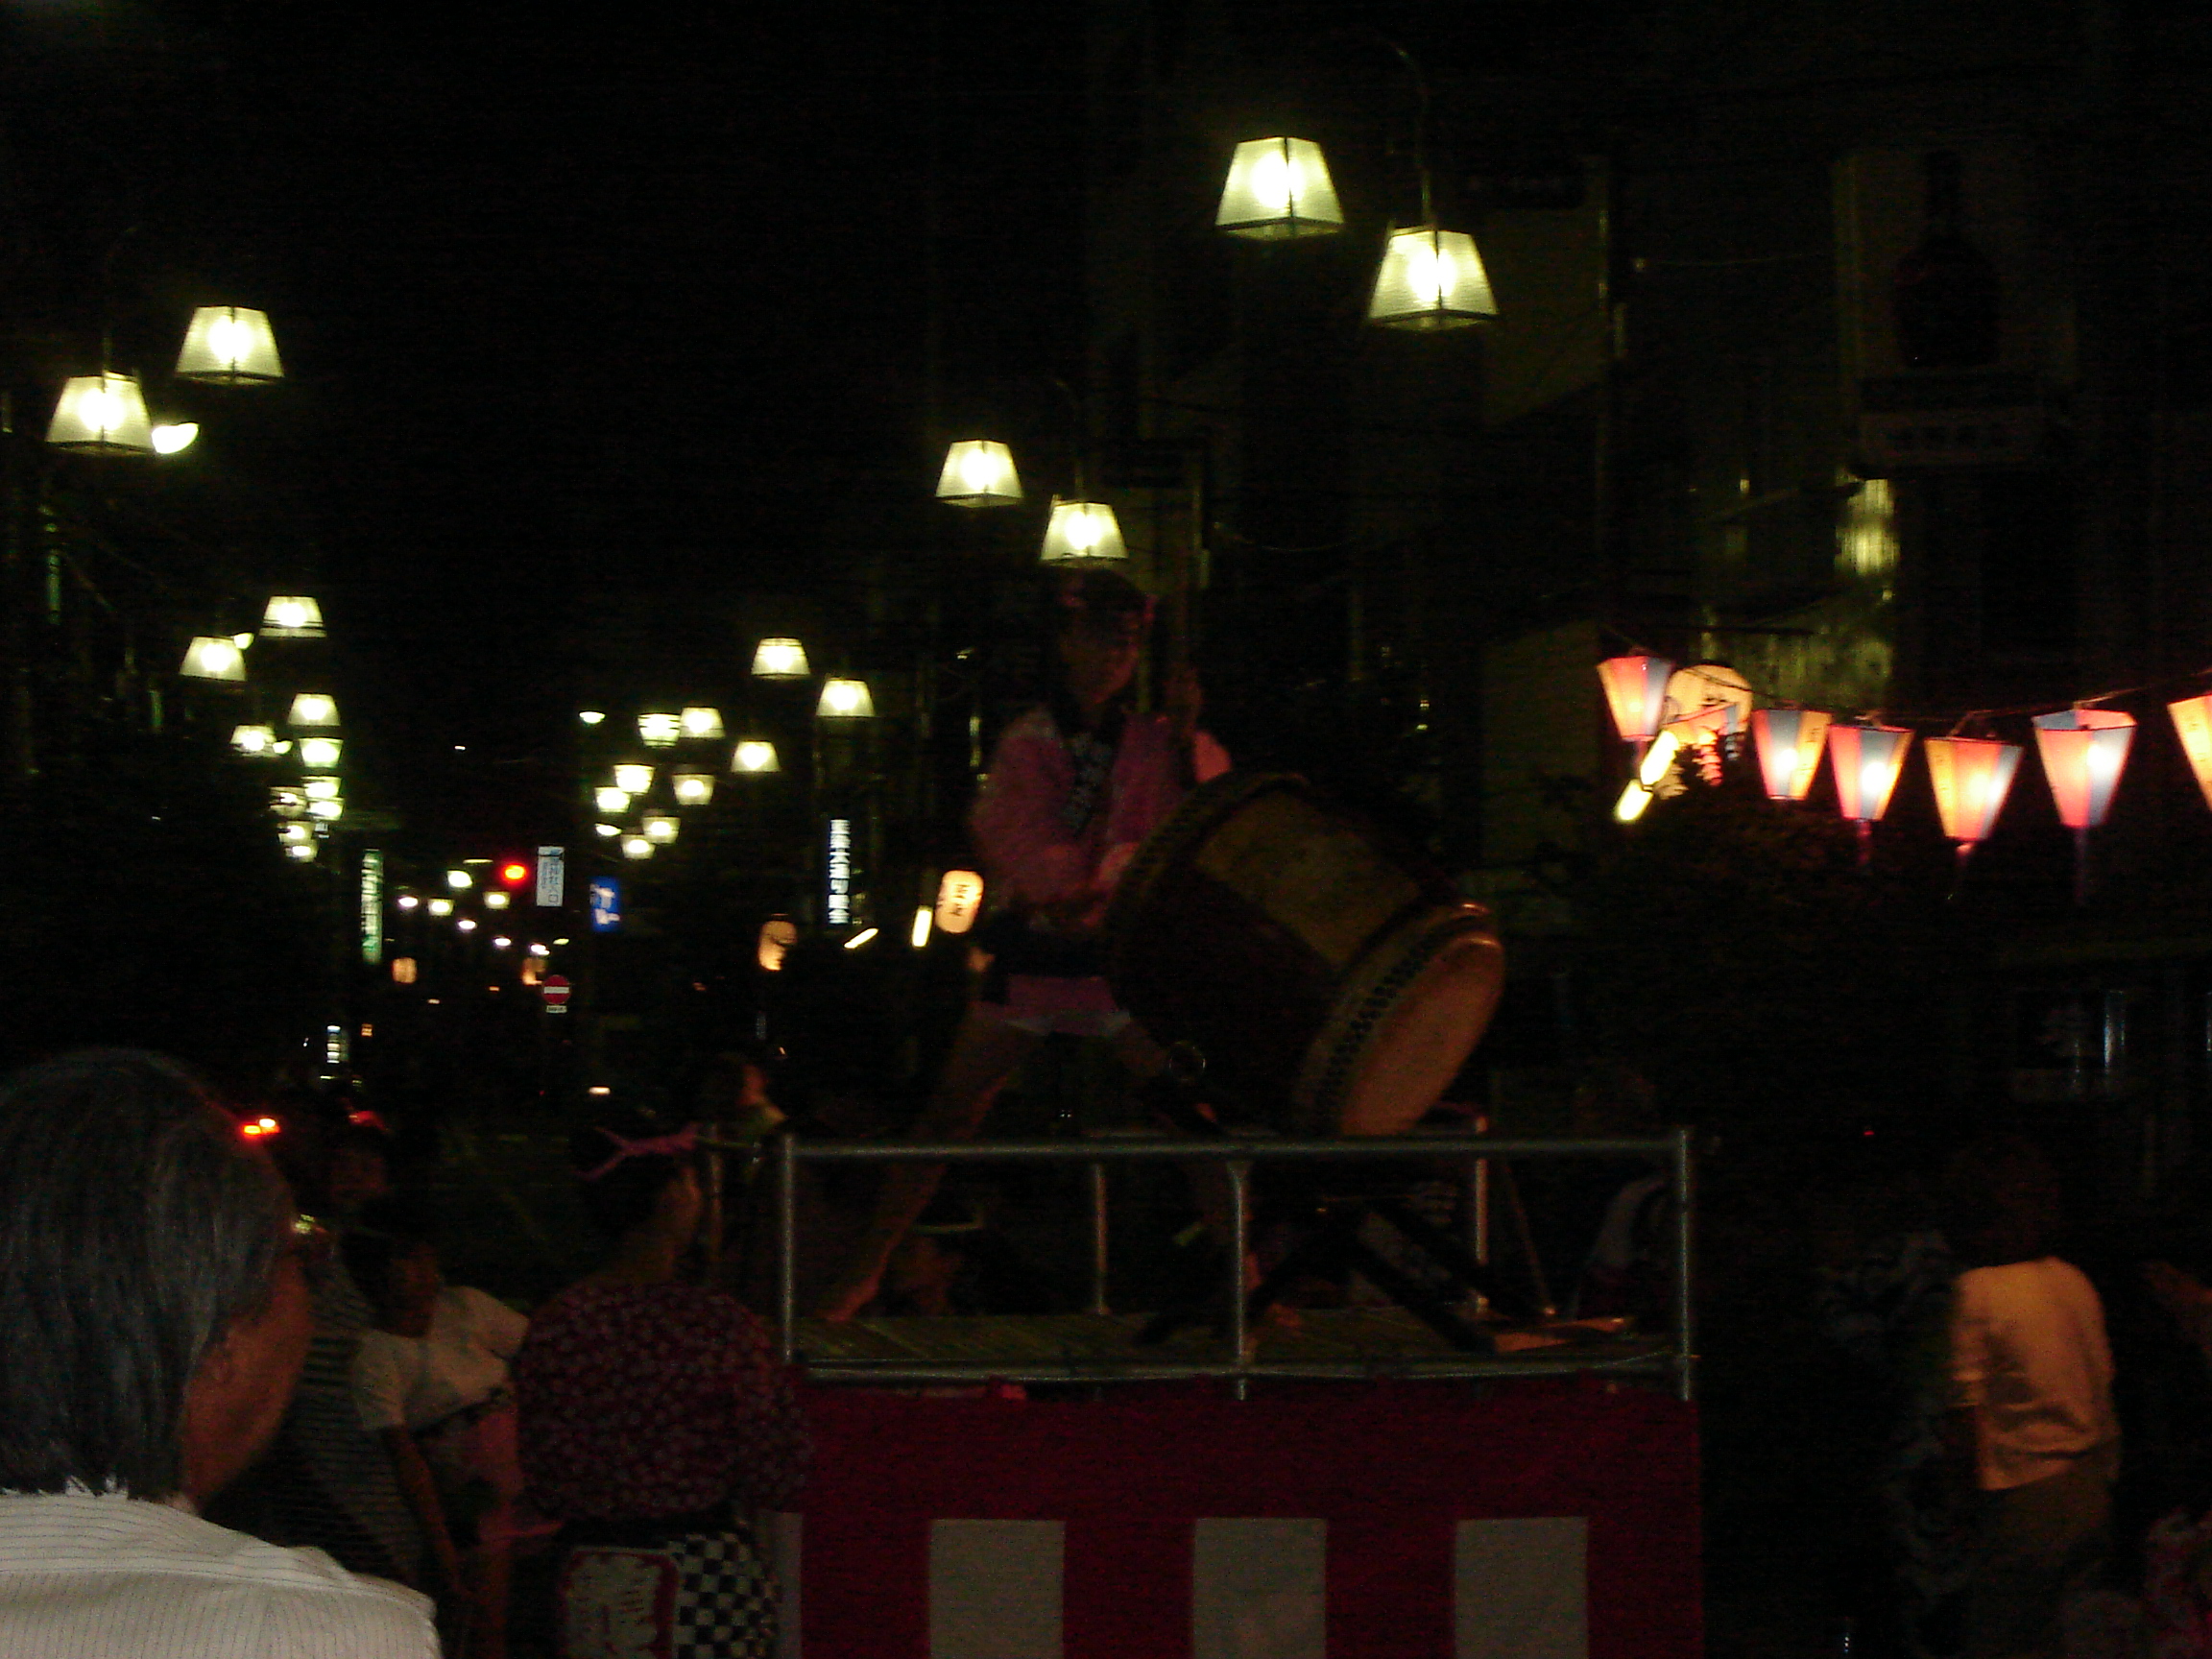 a drummer on a raised platform in the street